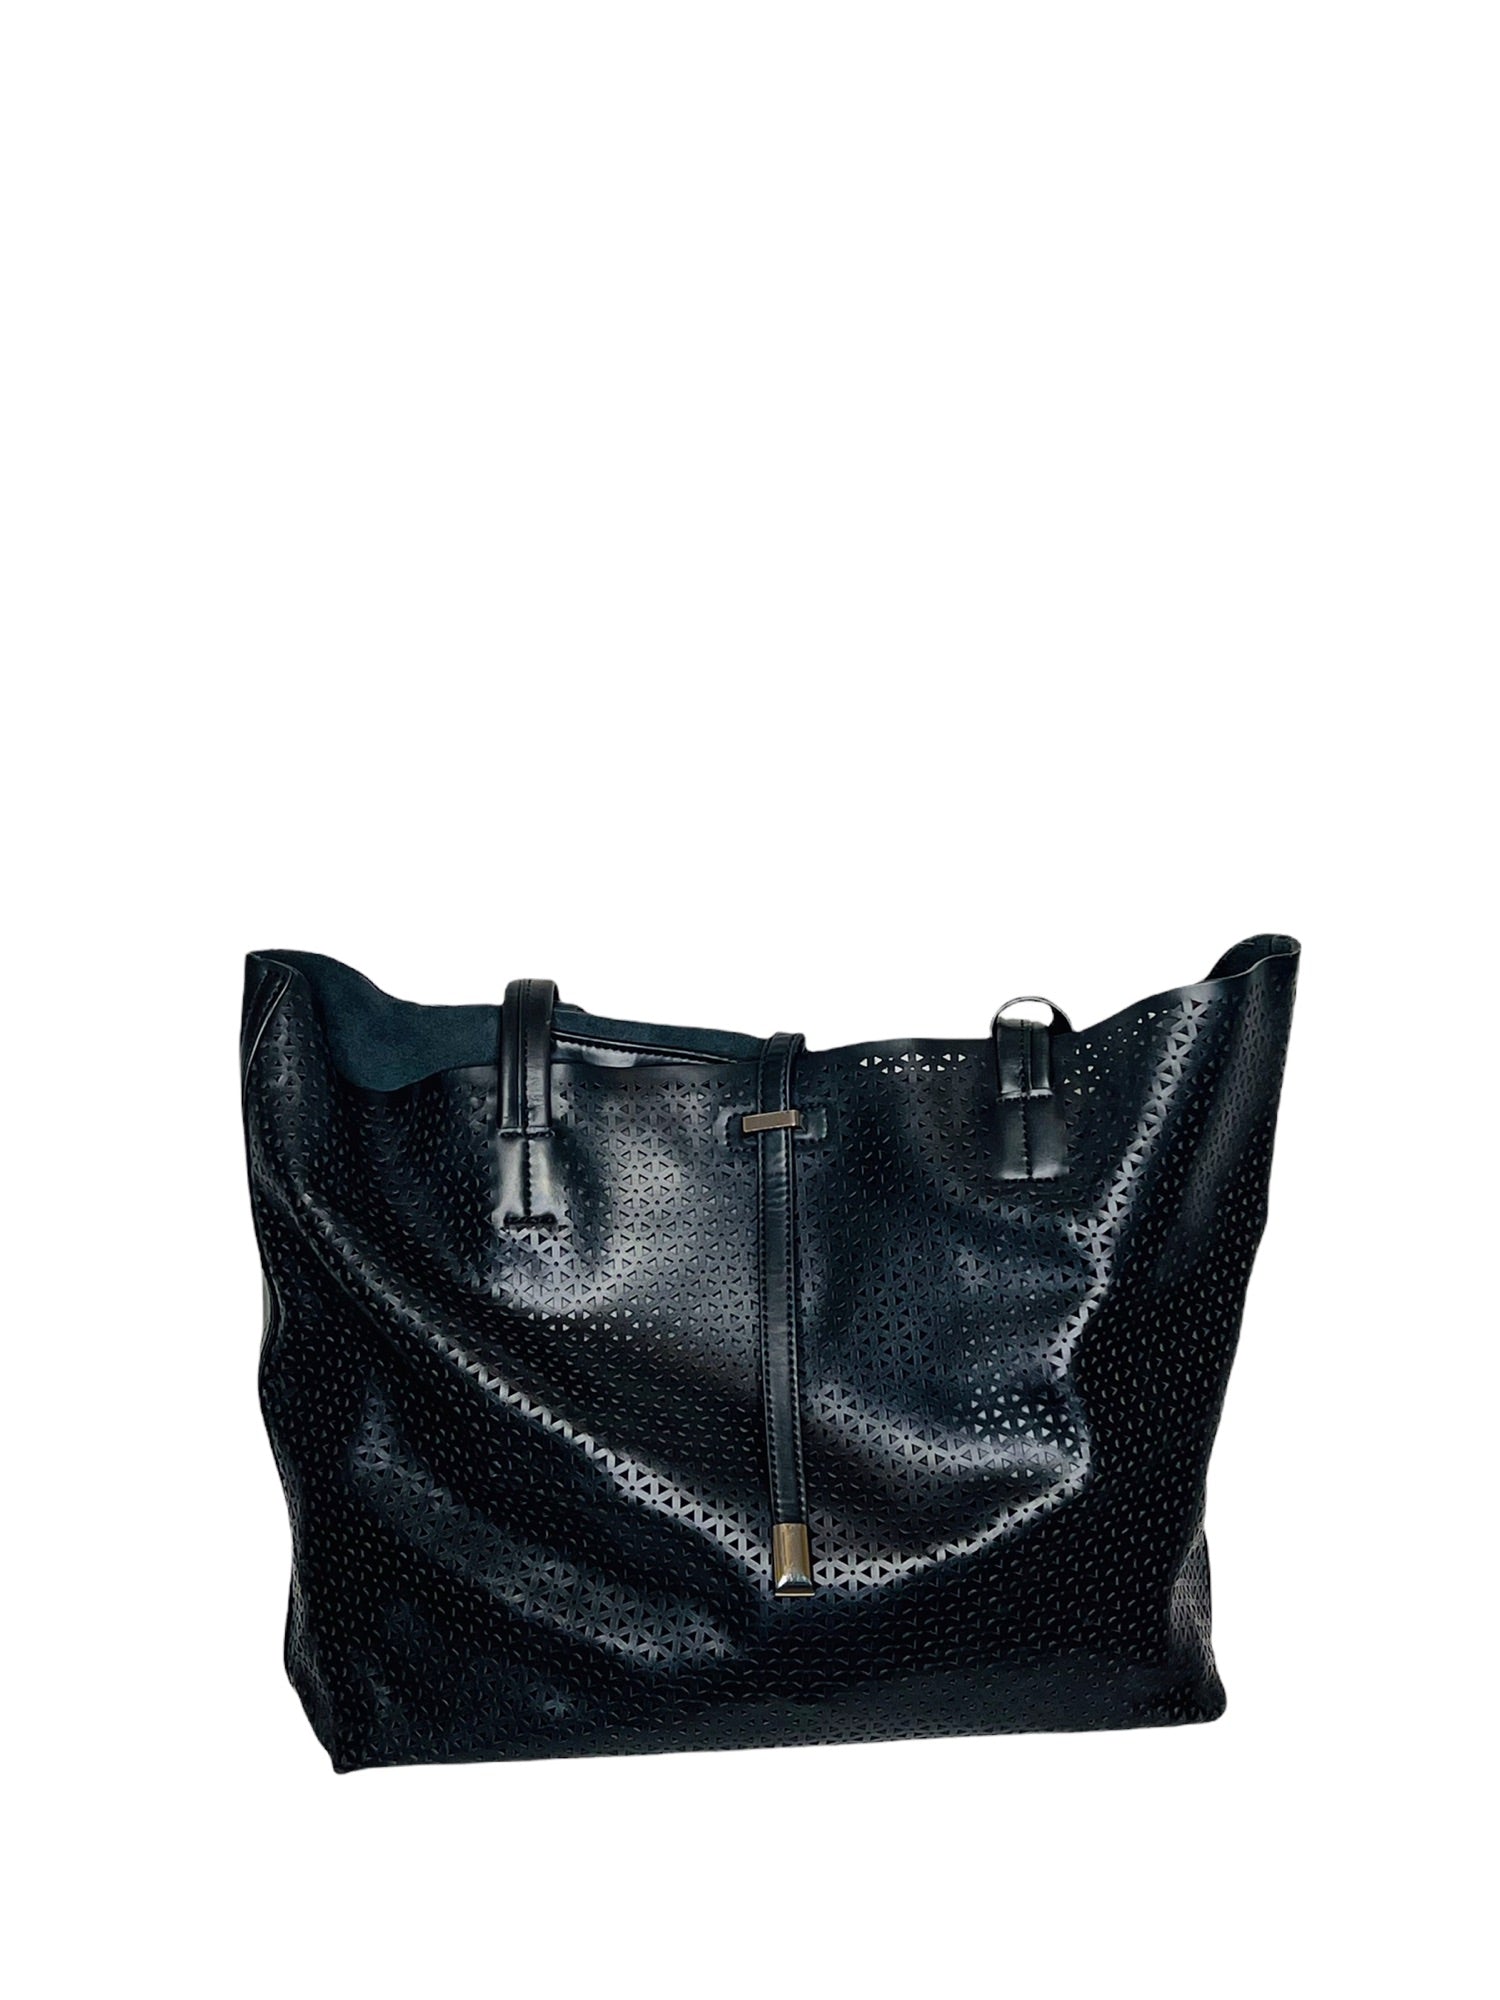 VINCE CAMUTO LEILA TOTE (RARE To Find)